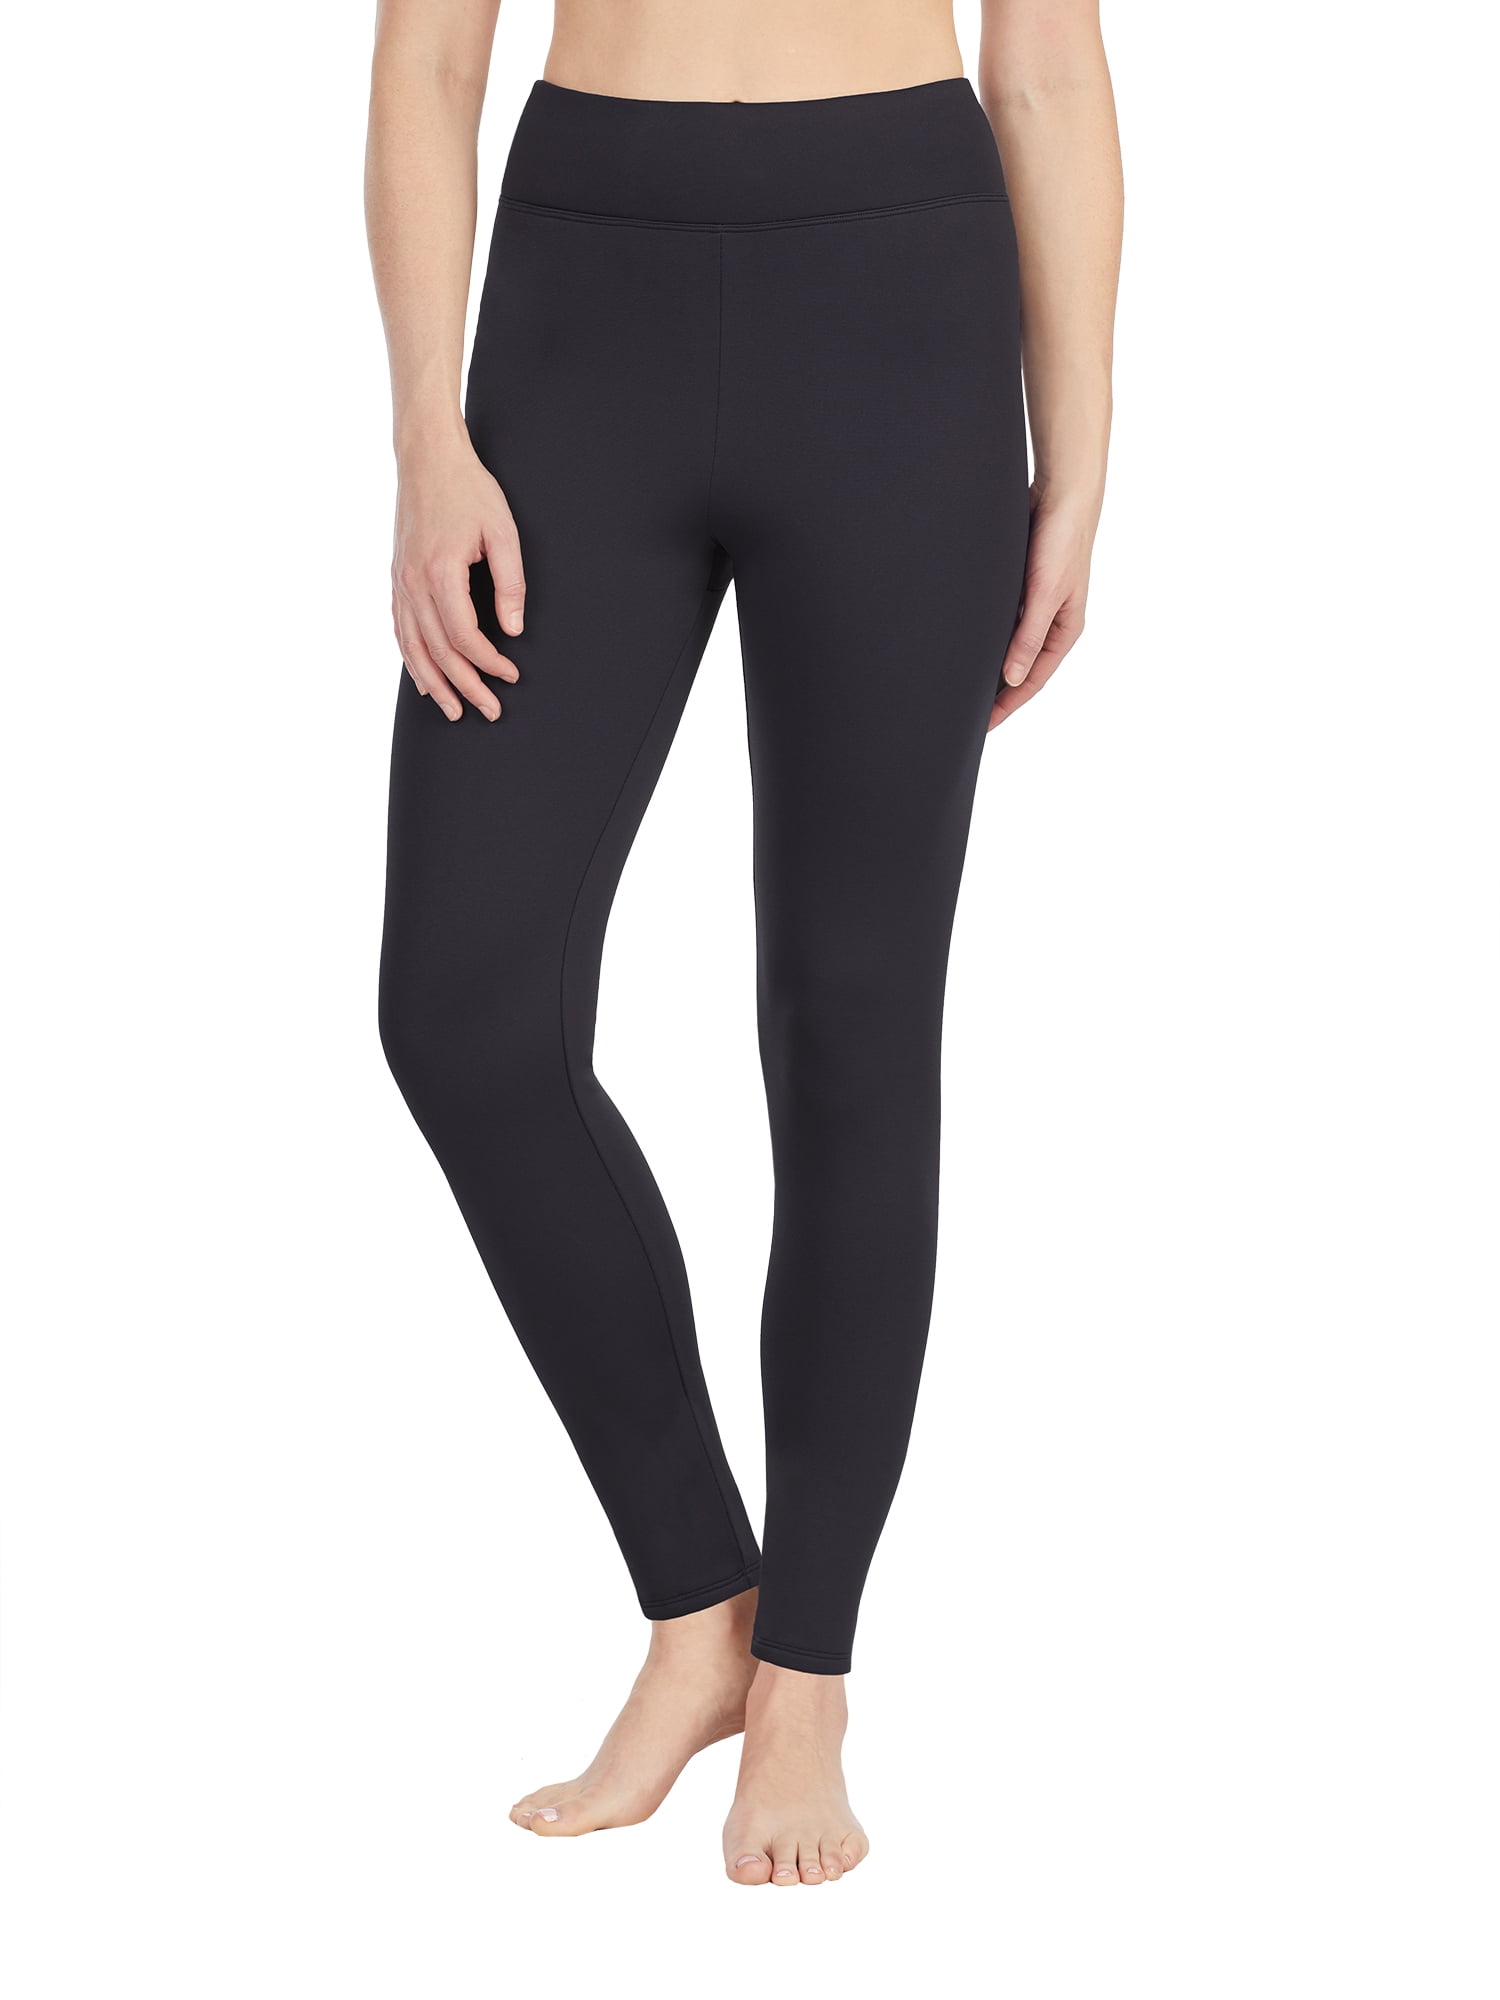 ClimateRight by Cuddl Duds Women's Thermal Guard Base Layer Leggings, Sizes  XS to XXL 